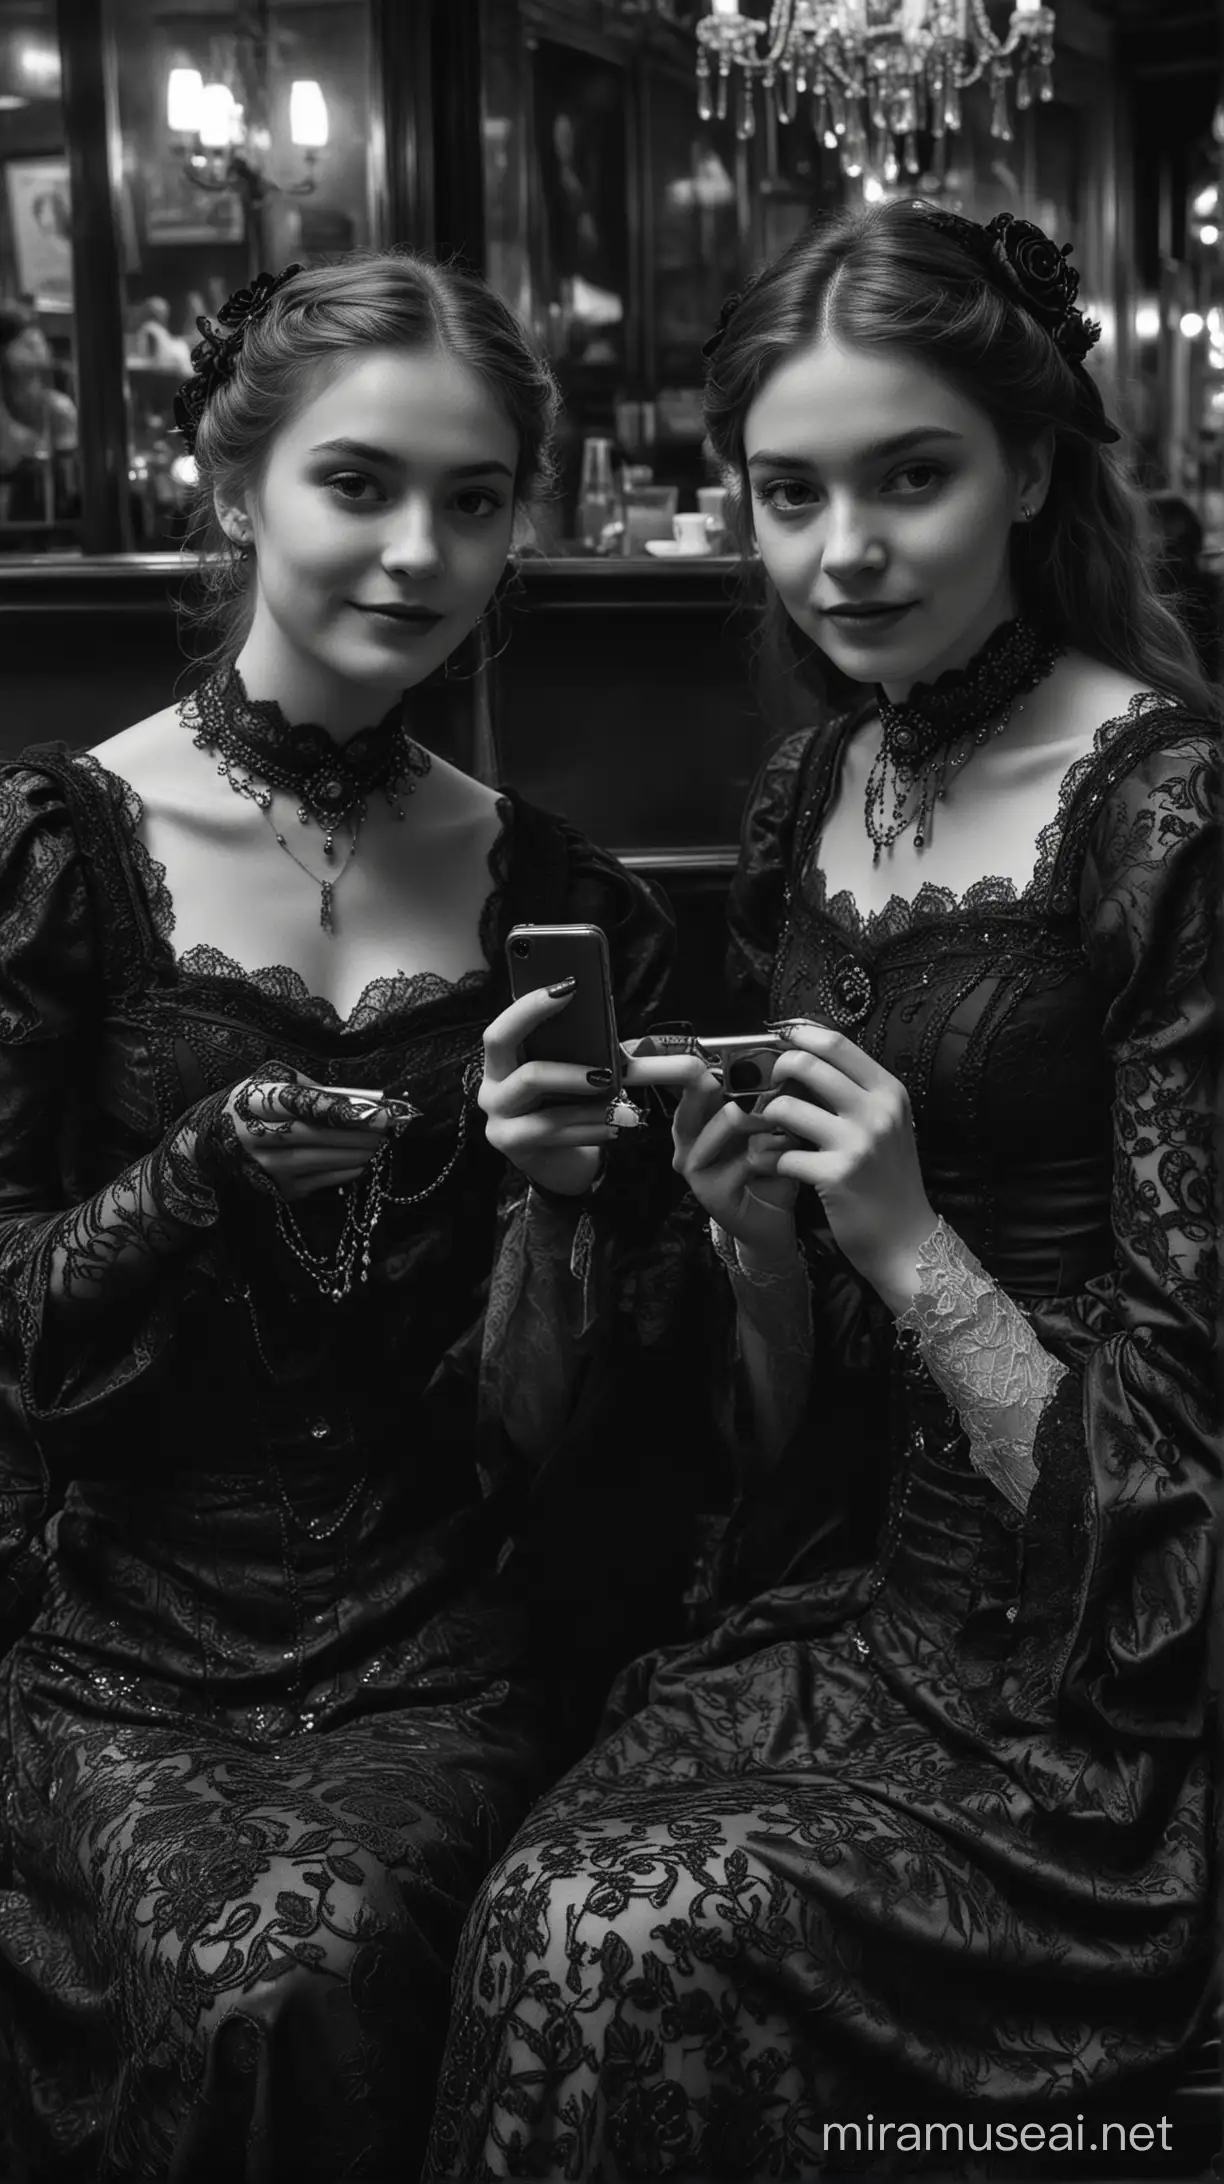 A black and white photograph of two Victorian-era girls sitting inside a dimly lit coffee shop, adorned with intricate and eerie decorations. They are both dressed in elegant, dark-colored gowns with lace details. One girl is holding an iPhone, while the other is smiling for the selfie. The ambiance of the photo is dark and mysterious, capturing the essence of a dark fantasy., photo, dark fantasy